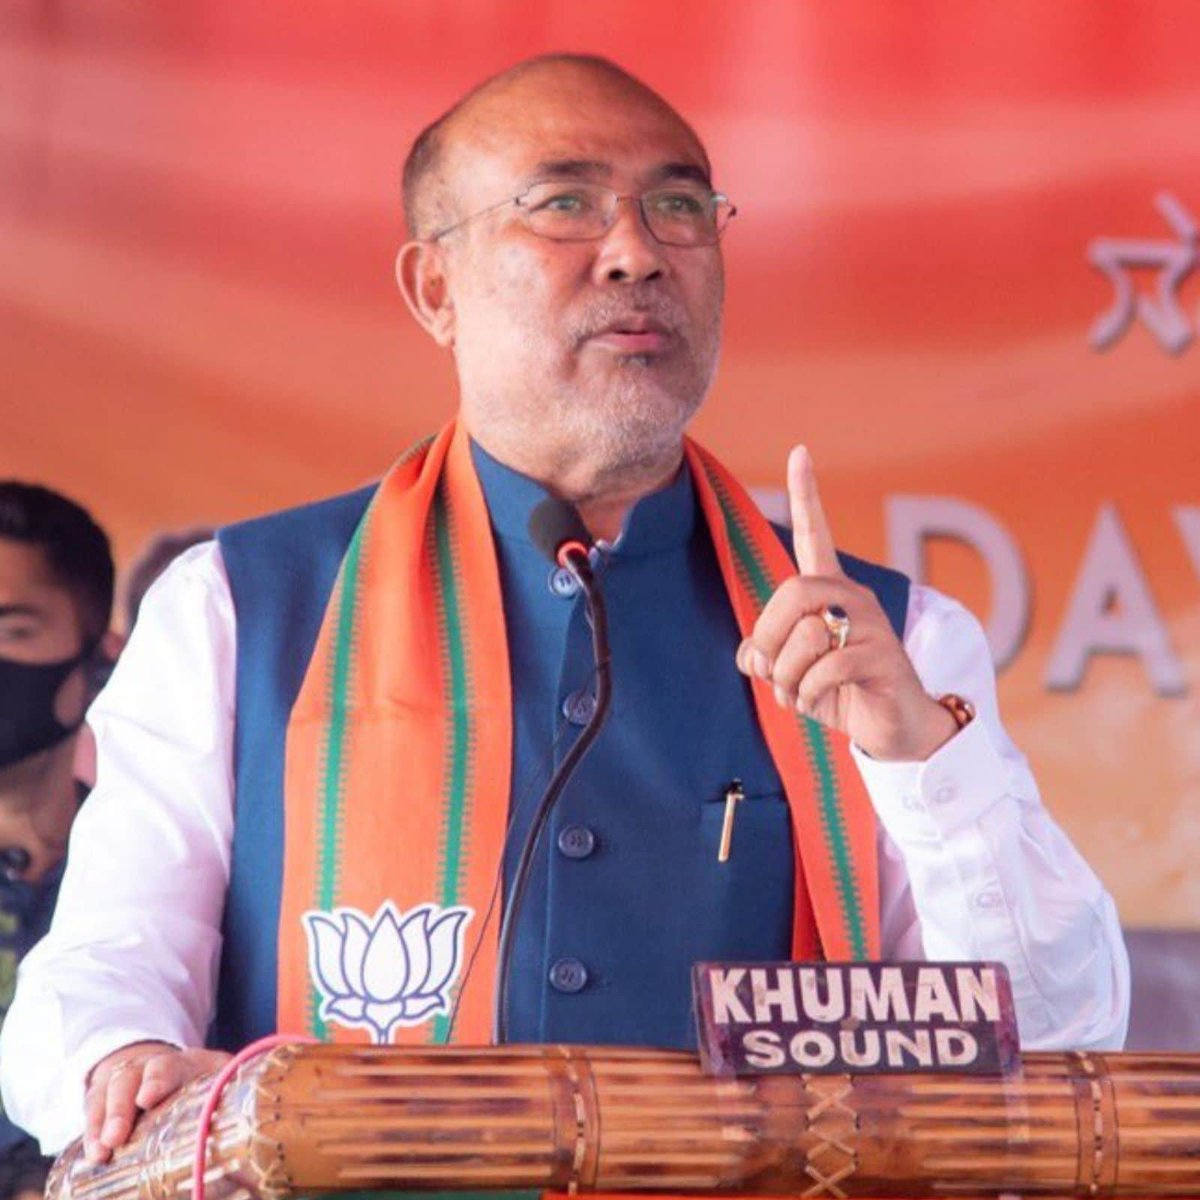 While Piddis were making noise over #Manipur...HM .@AmitShah Ji & CM .@NBirenSingh Ji were quietly working for PERMENANT Solution! 𝐅𝐈𝐑𝐒𝐓 𝐏𝐇𝐀𝐒𝐄 𝐎𝐅 𝐃𝐄𝐏𝐎𝐑𝐓𝐀𝐓𝐈𝐎𝐍 𝐎𝐅 77 𝐈𝐋𝐋𝐄𝐆𝐀𝐋 𝐈𝐌𝐌𝐈𝐆𝐑𝐀𝐍𝐓𝐒 𝐅𝐑𝐎𝐌 𝐌𝐘𝐀𝐍𝐌𝐀𝐑 𝐂𝐎𝐌𝐏𝐋𝐄𝐓𝐄𝐃 𝐓𝐎𝐃𝐀𝐘!…